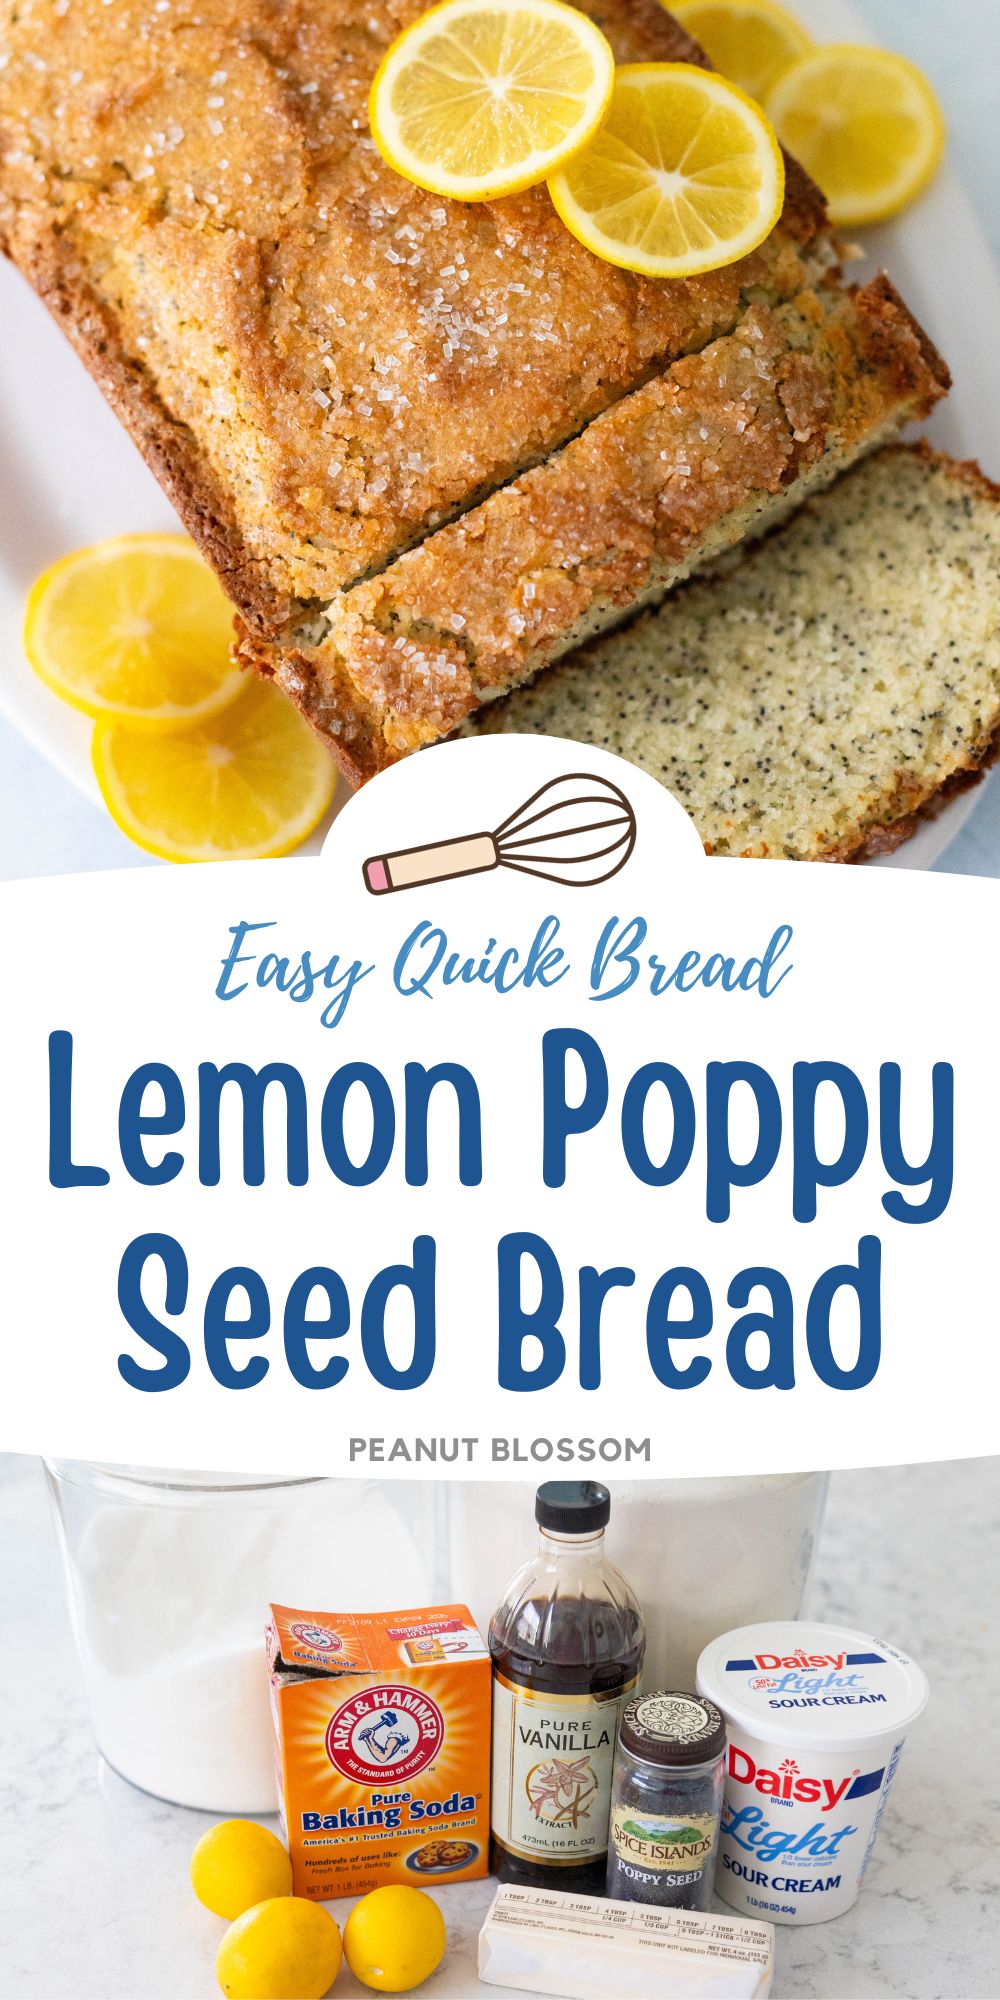 The photo collage shows the finished lemon poppy seed bread with lemon slices next to a photo of the ingredients needed to make it.